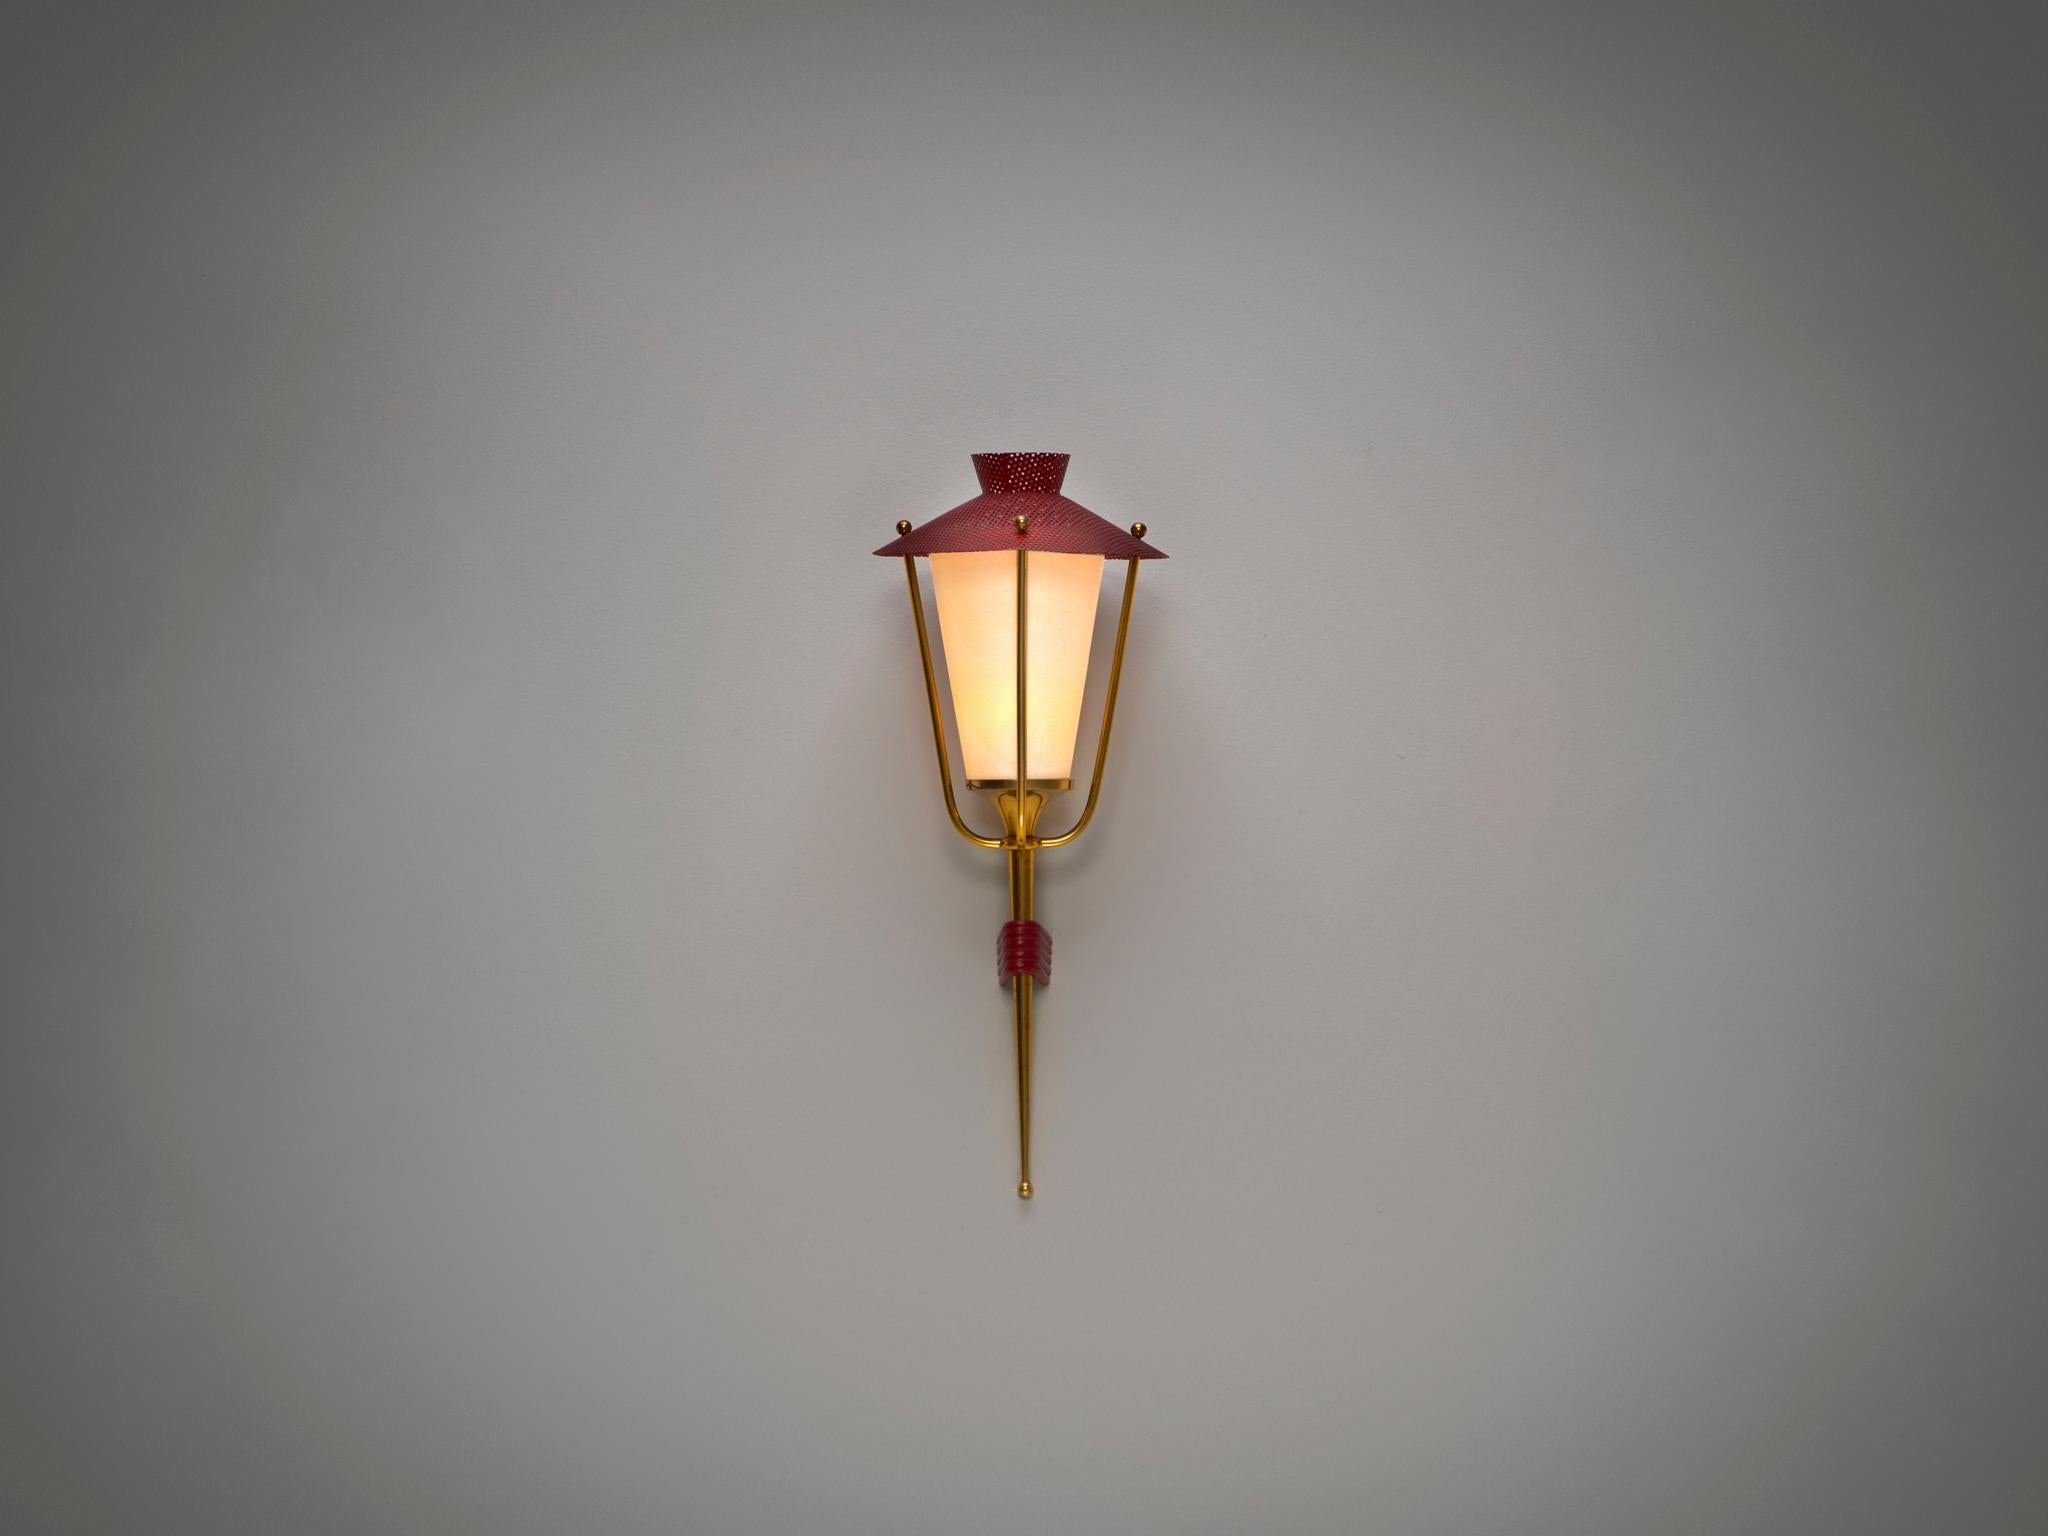 Maison Arlus, wall light, metal, glass and brass, France, 1960s. 

Elegant wall light in red mesh metal and brass. This light reminds of traditional lights of a carriage or outdoor lights. This lantern shows beautiful color combinations and a warm